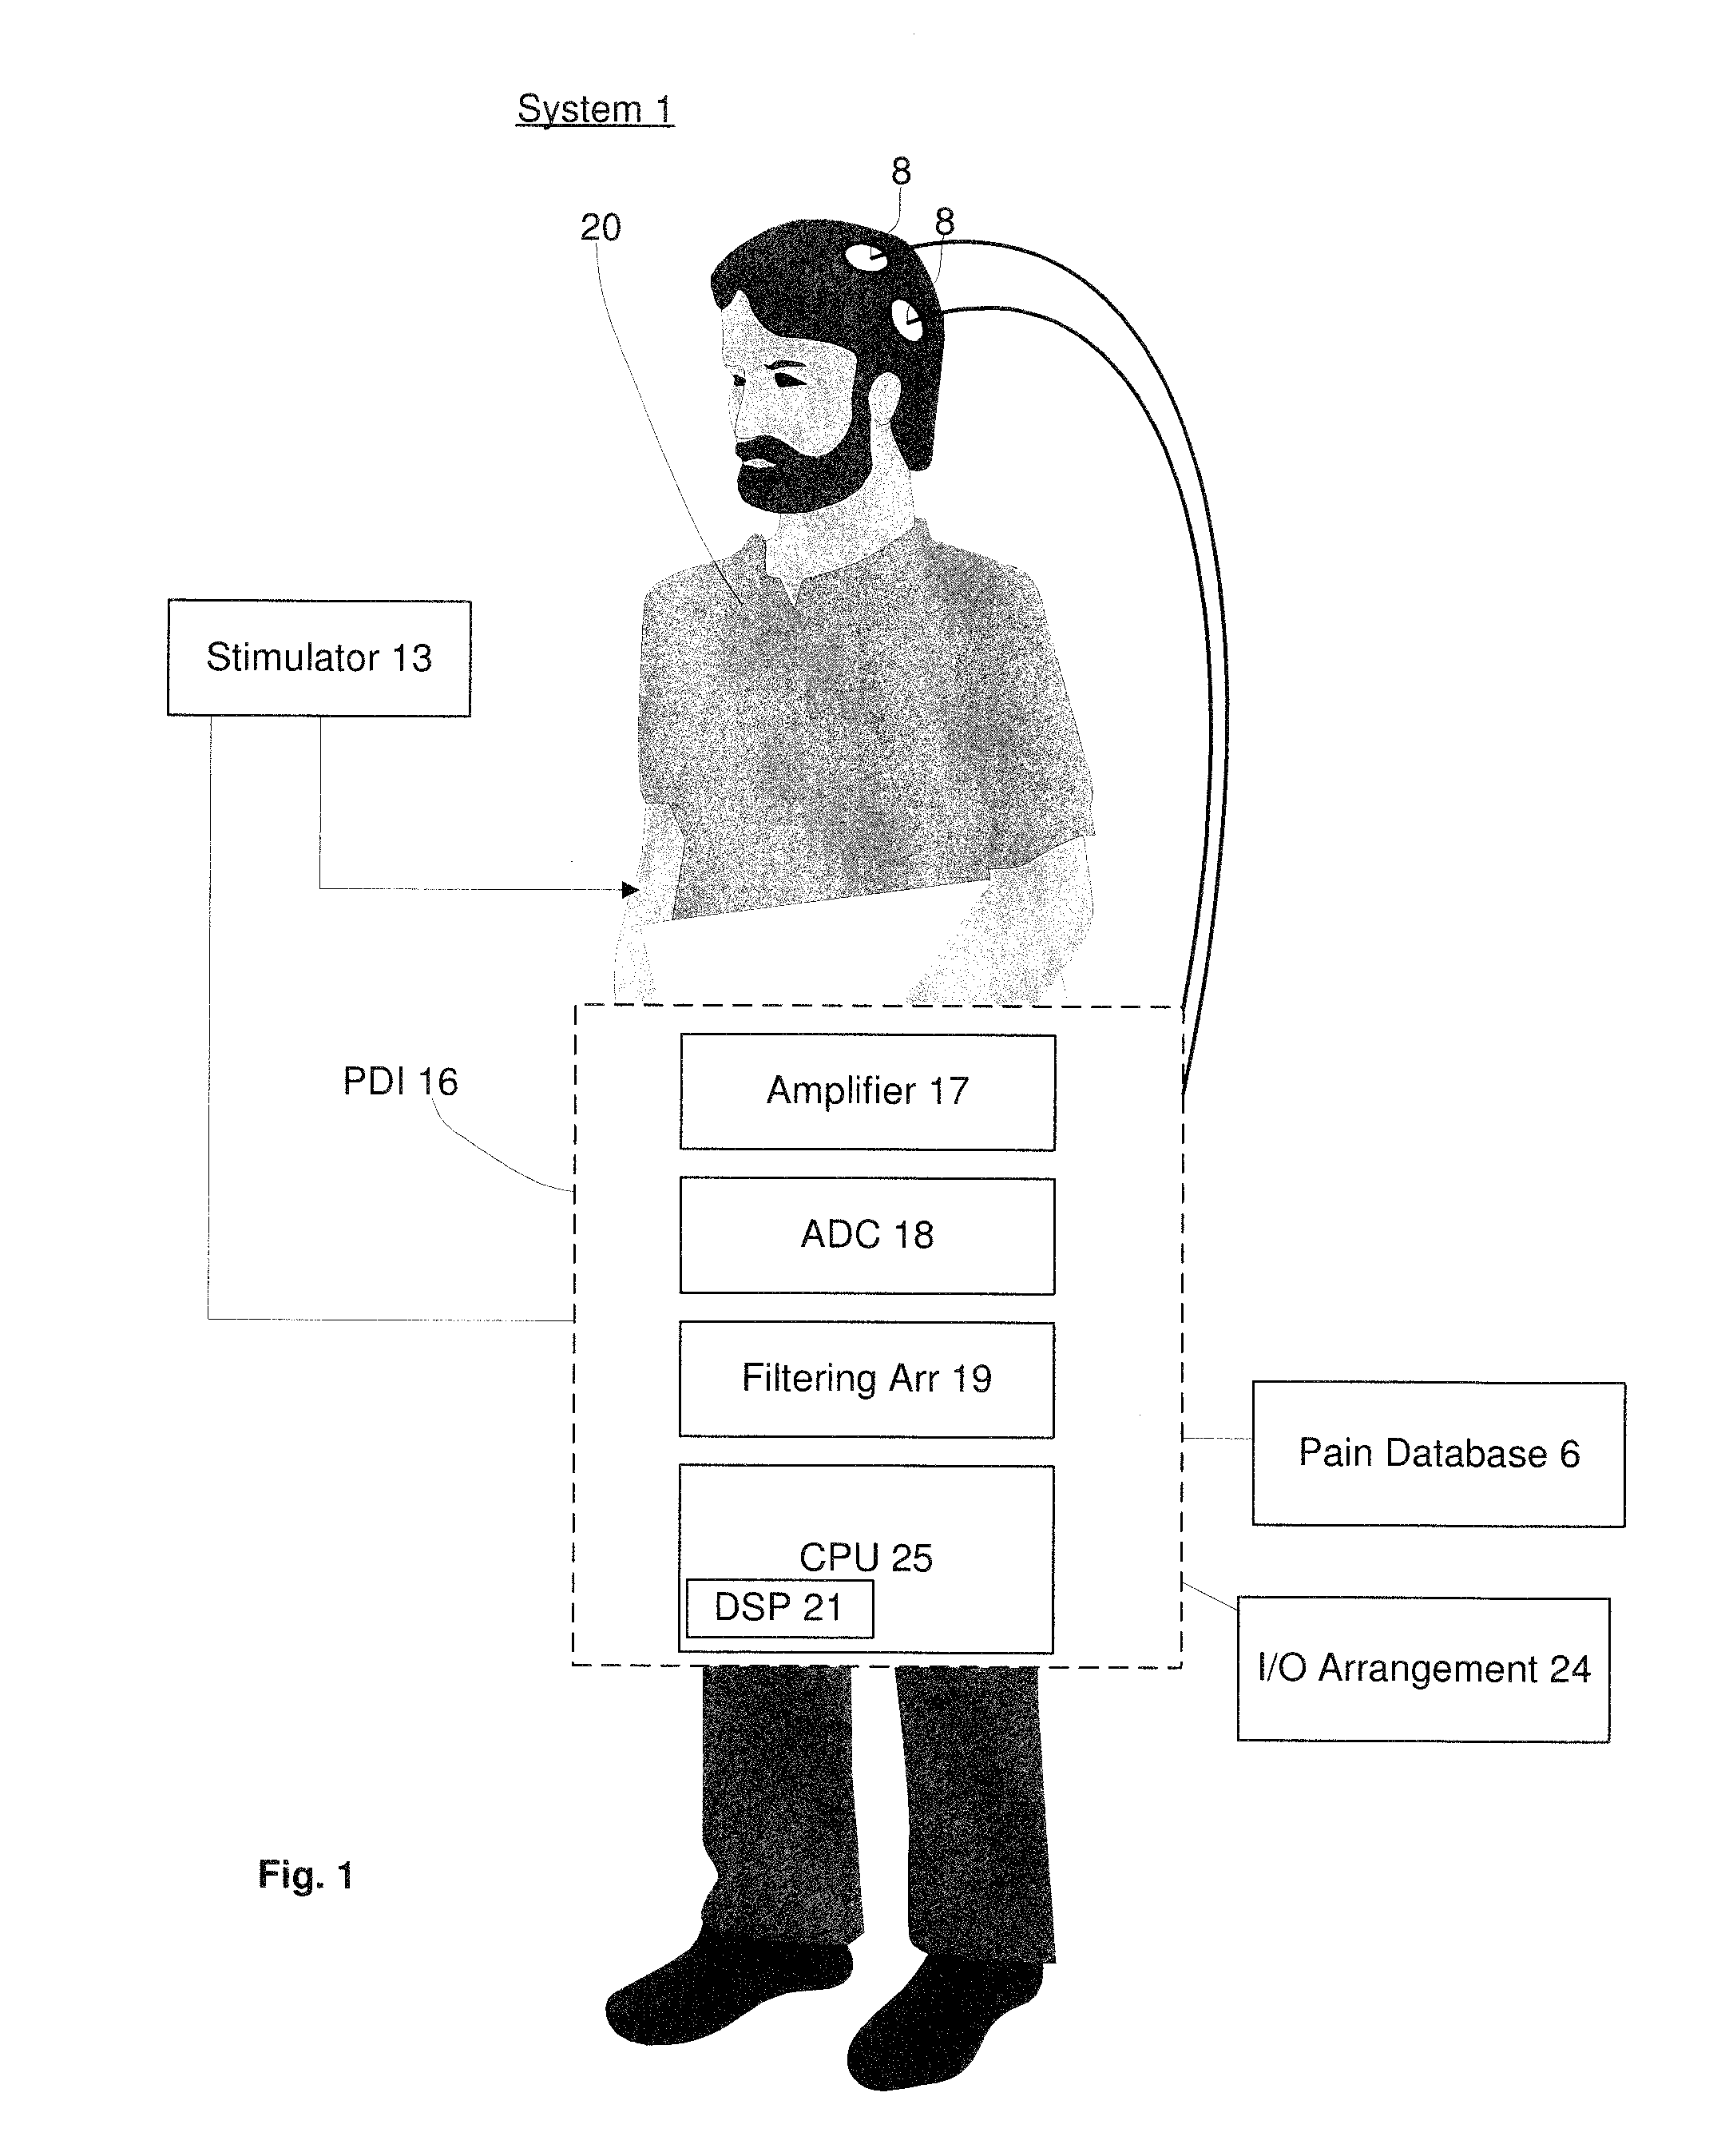 System and Method for Pain Detection and Computation of a Pain Quantification Index